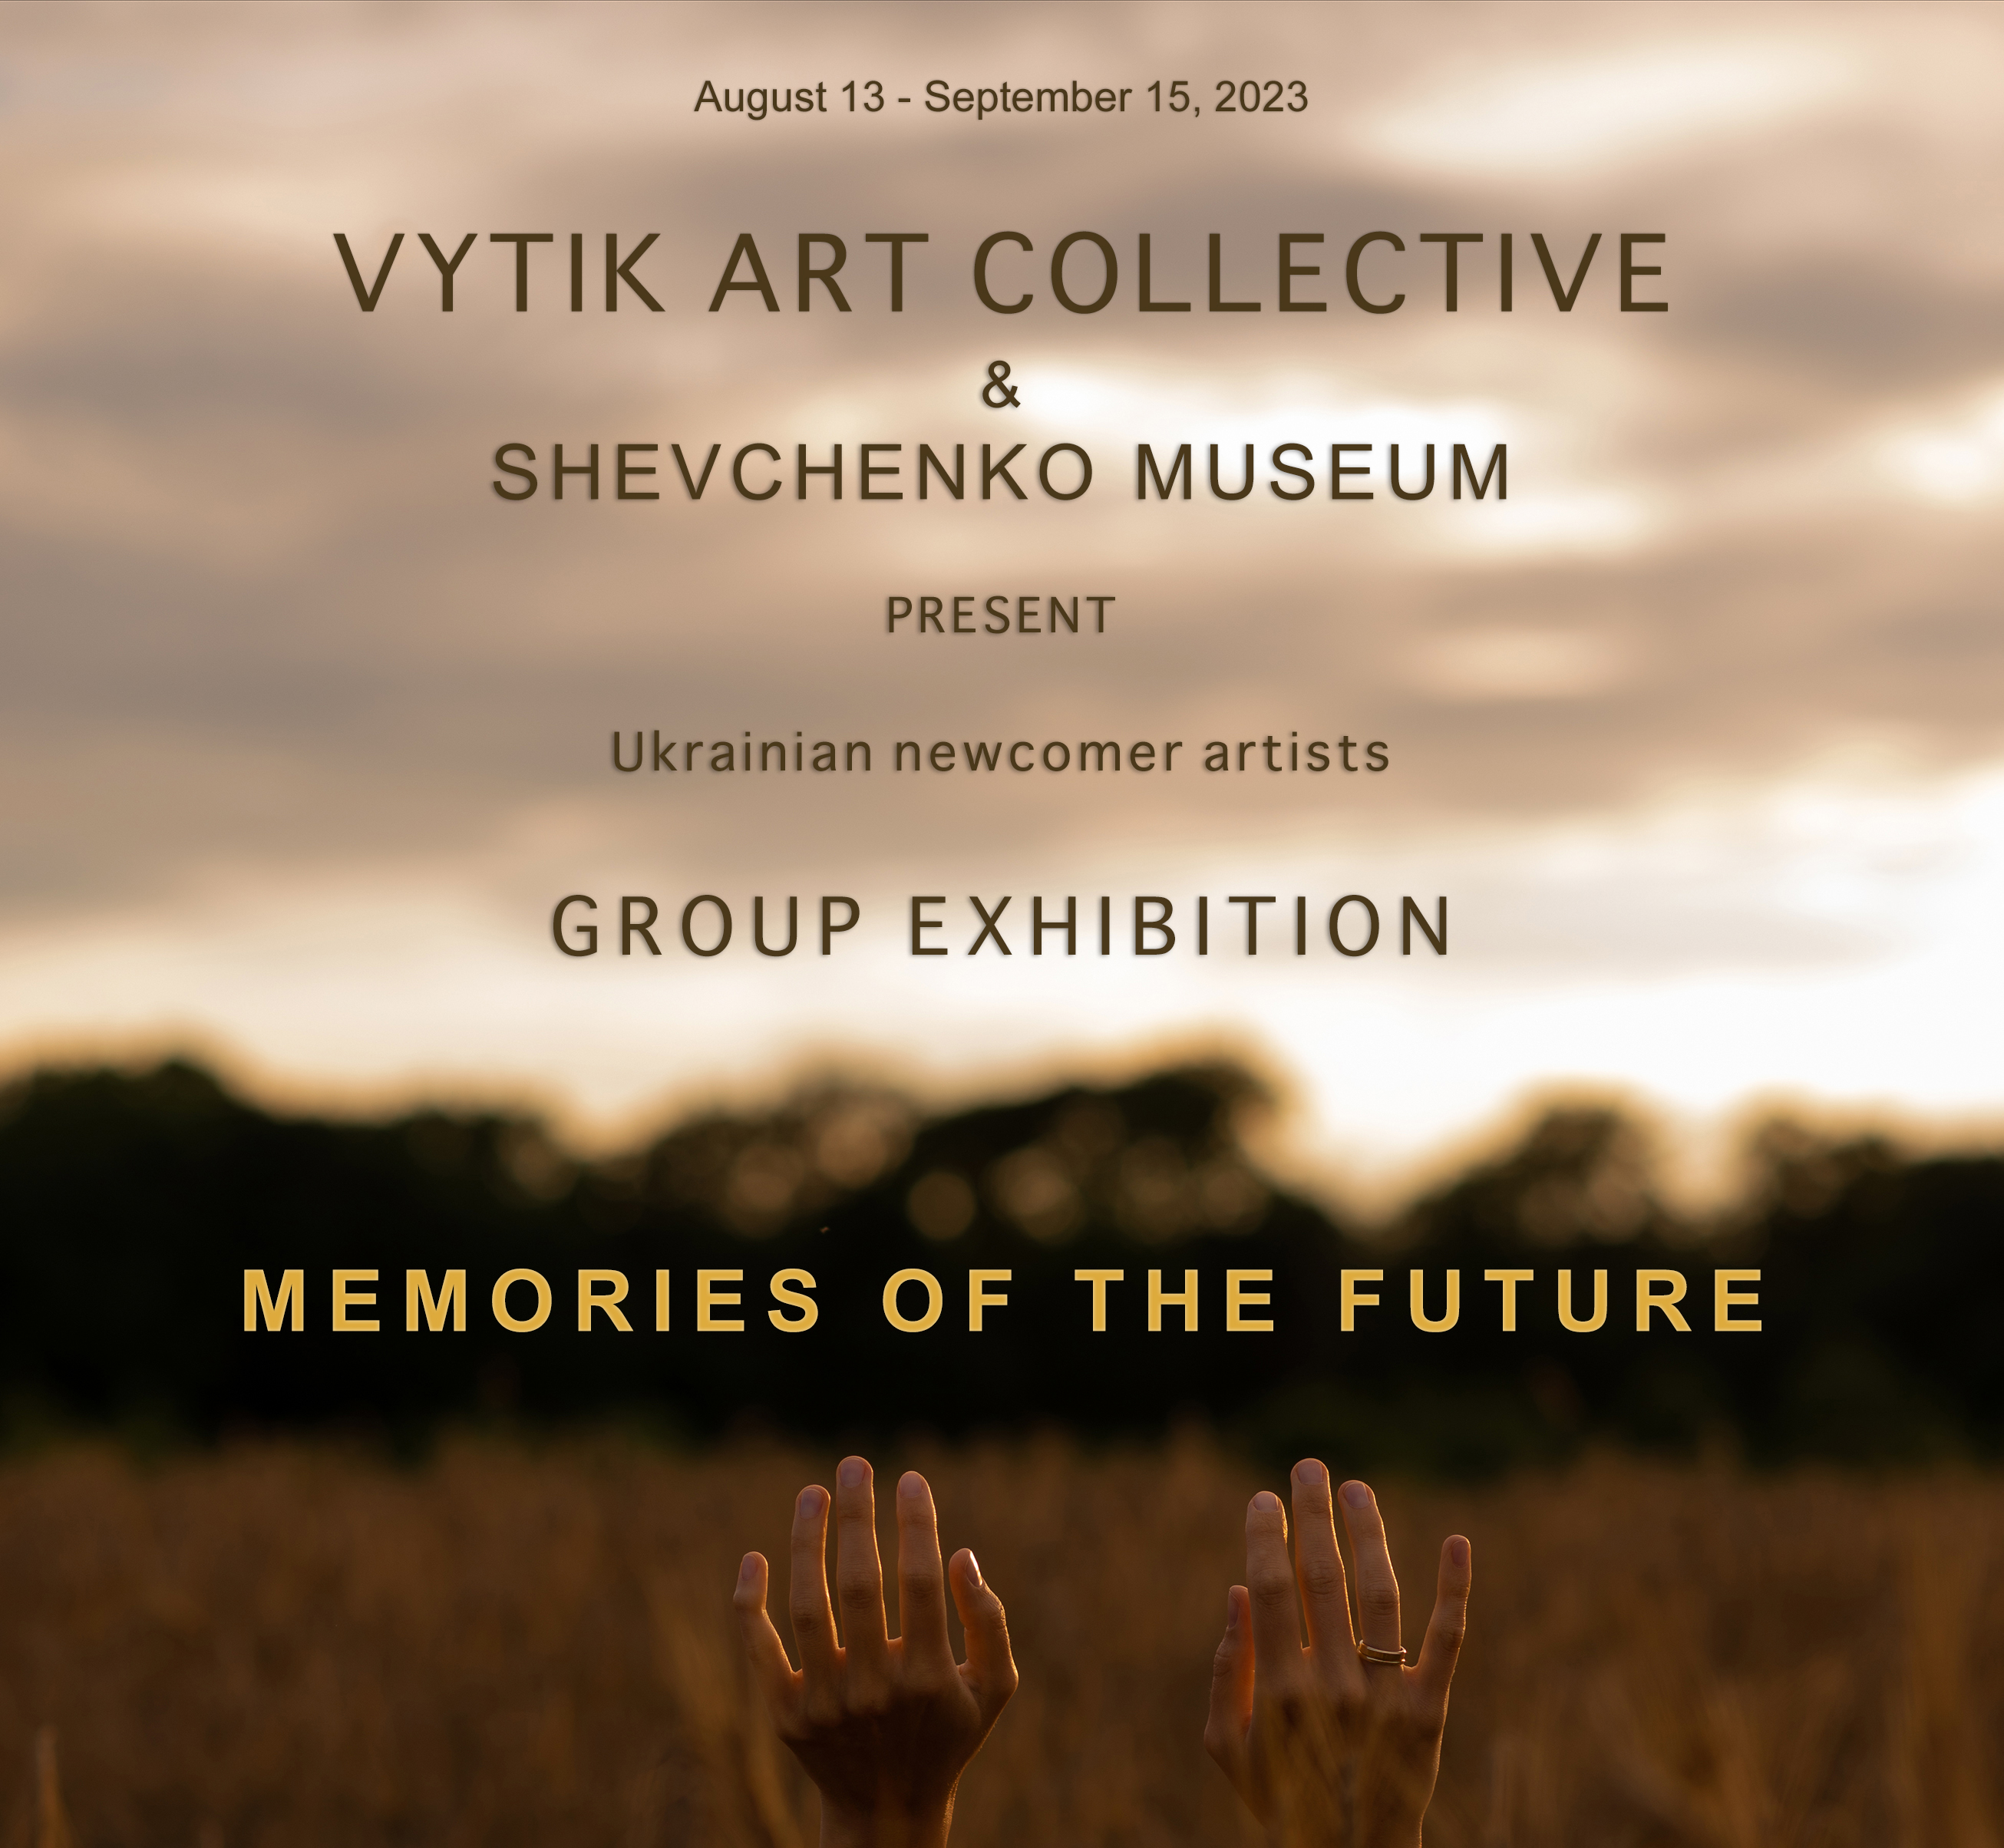 Memories of the Future Exhibition, August 13 - September 15, 2023